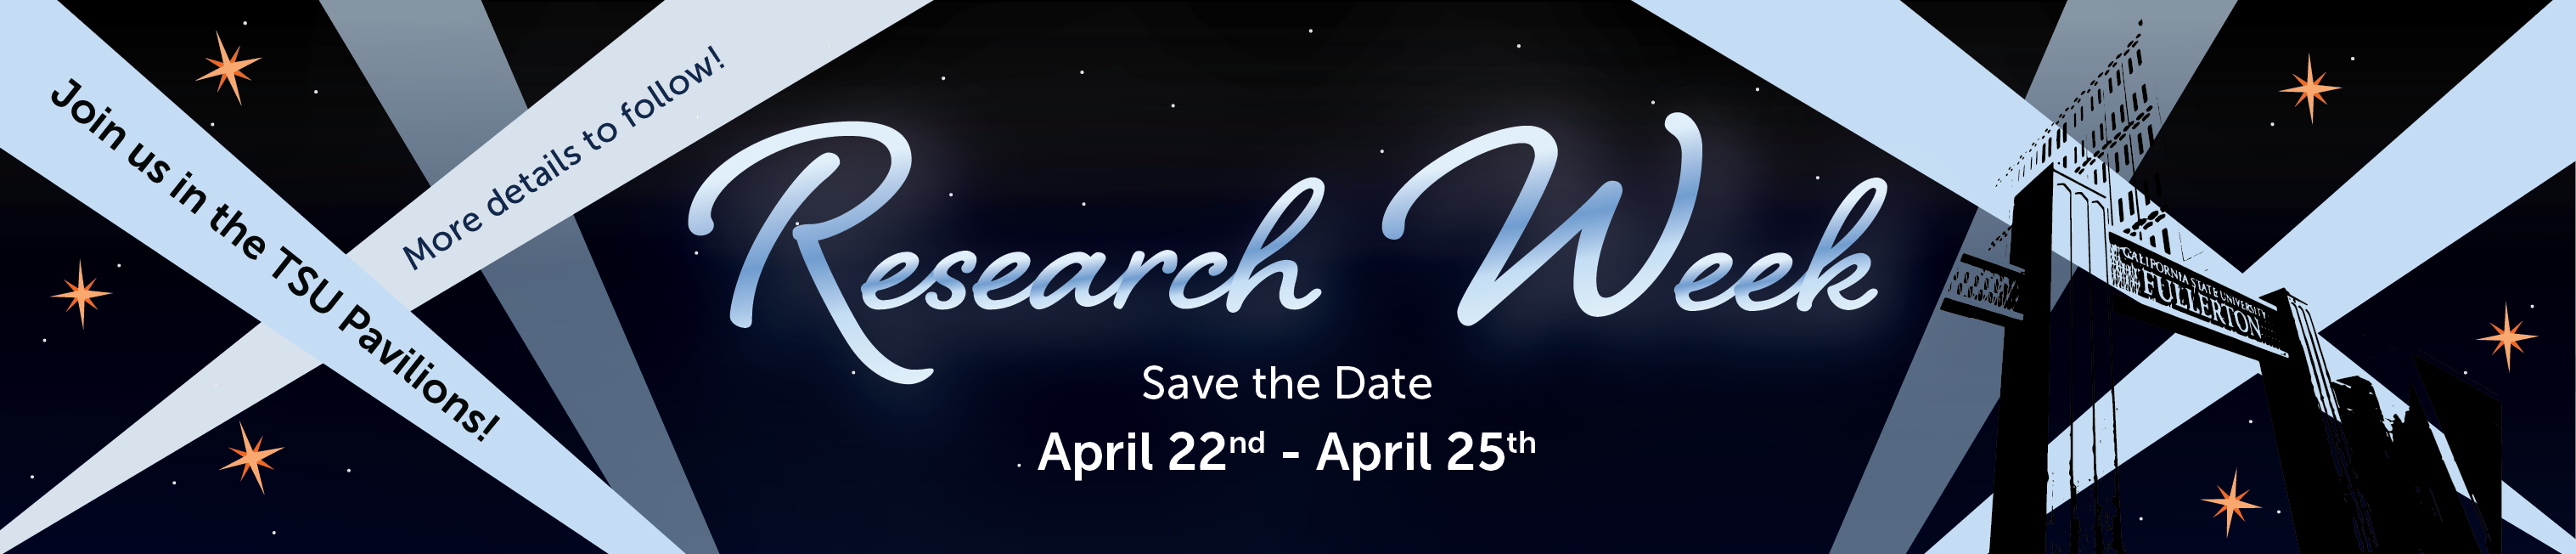 Save the Date April 22nd - April 26th Research Week at the TSU Pavilions banner